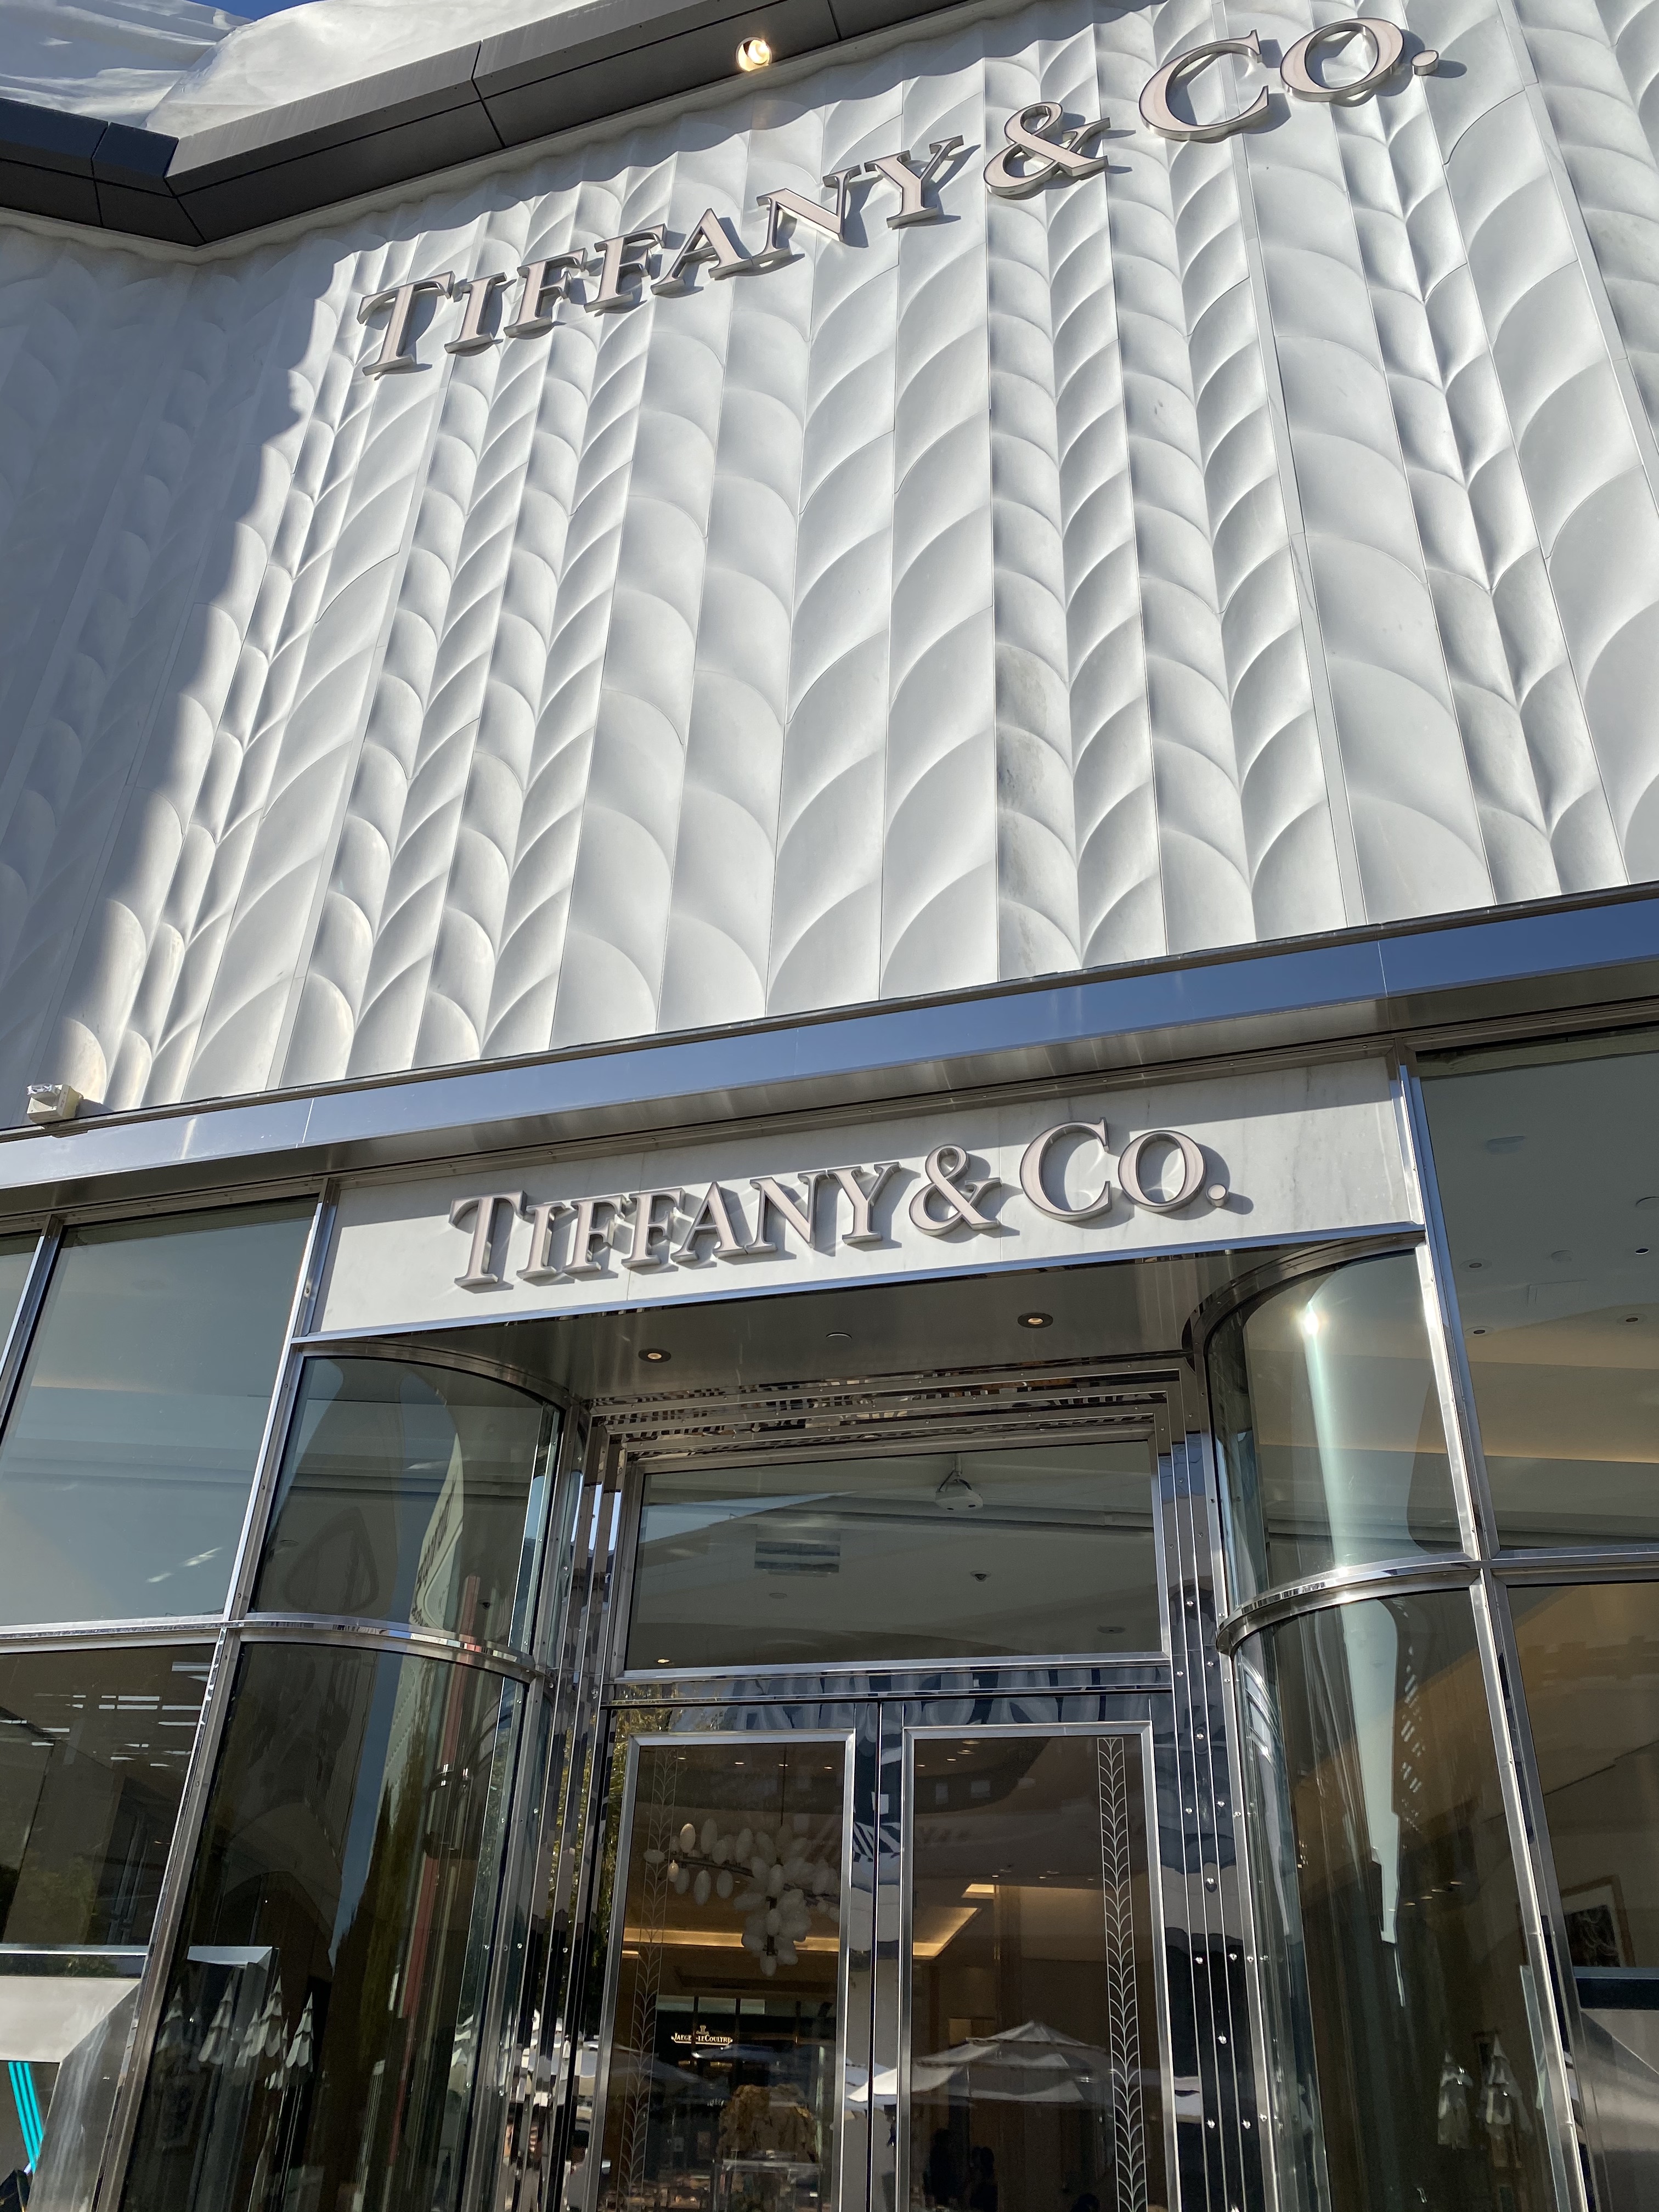 File:Tiffany & Co. at Westfield Valley Fair, San Jose, Silicon